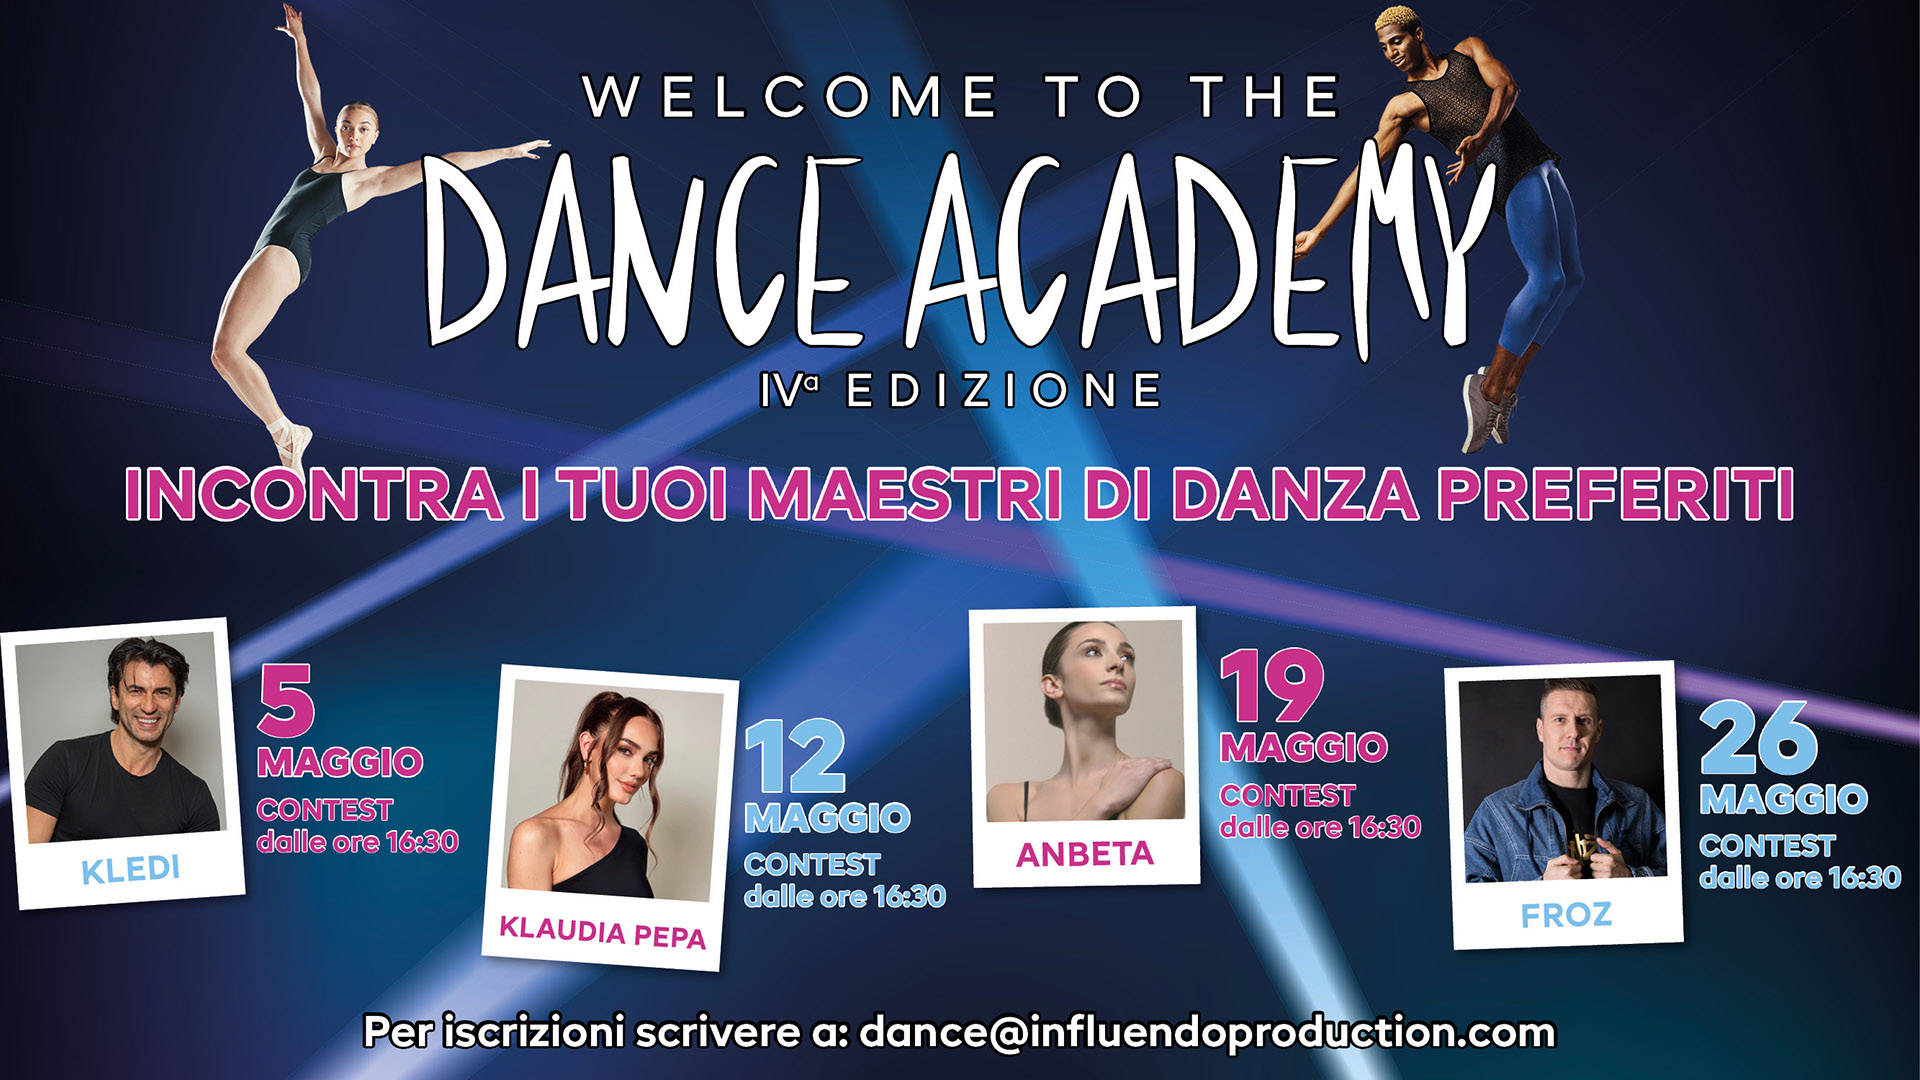 Welcome to the Dance Academy